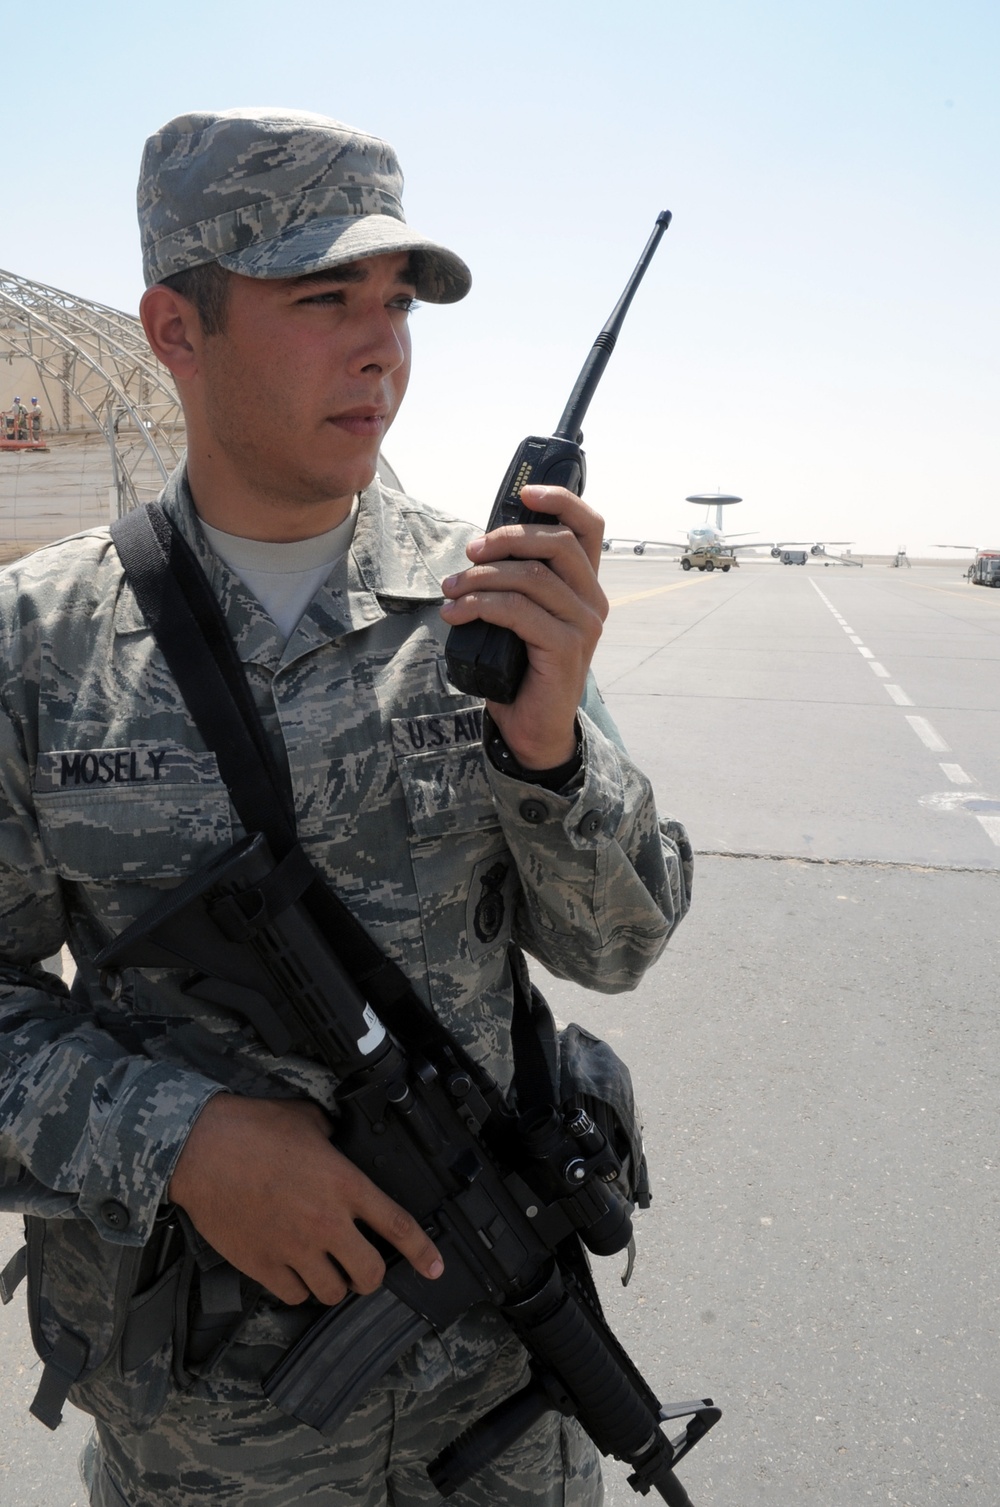 Elmendorf Airman First Class, Phoenix Native, Supports Force Protection, Security Efforts at Southwest Asia Location